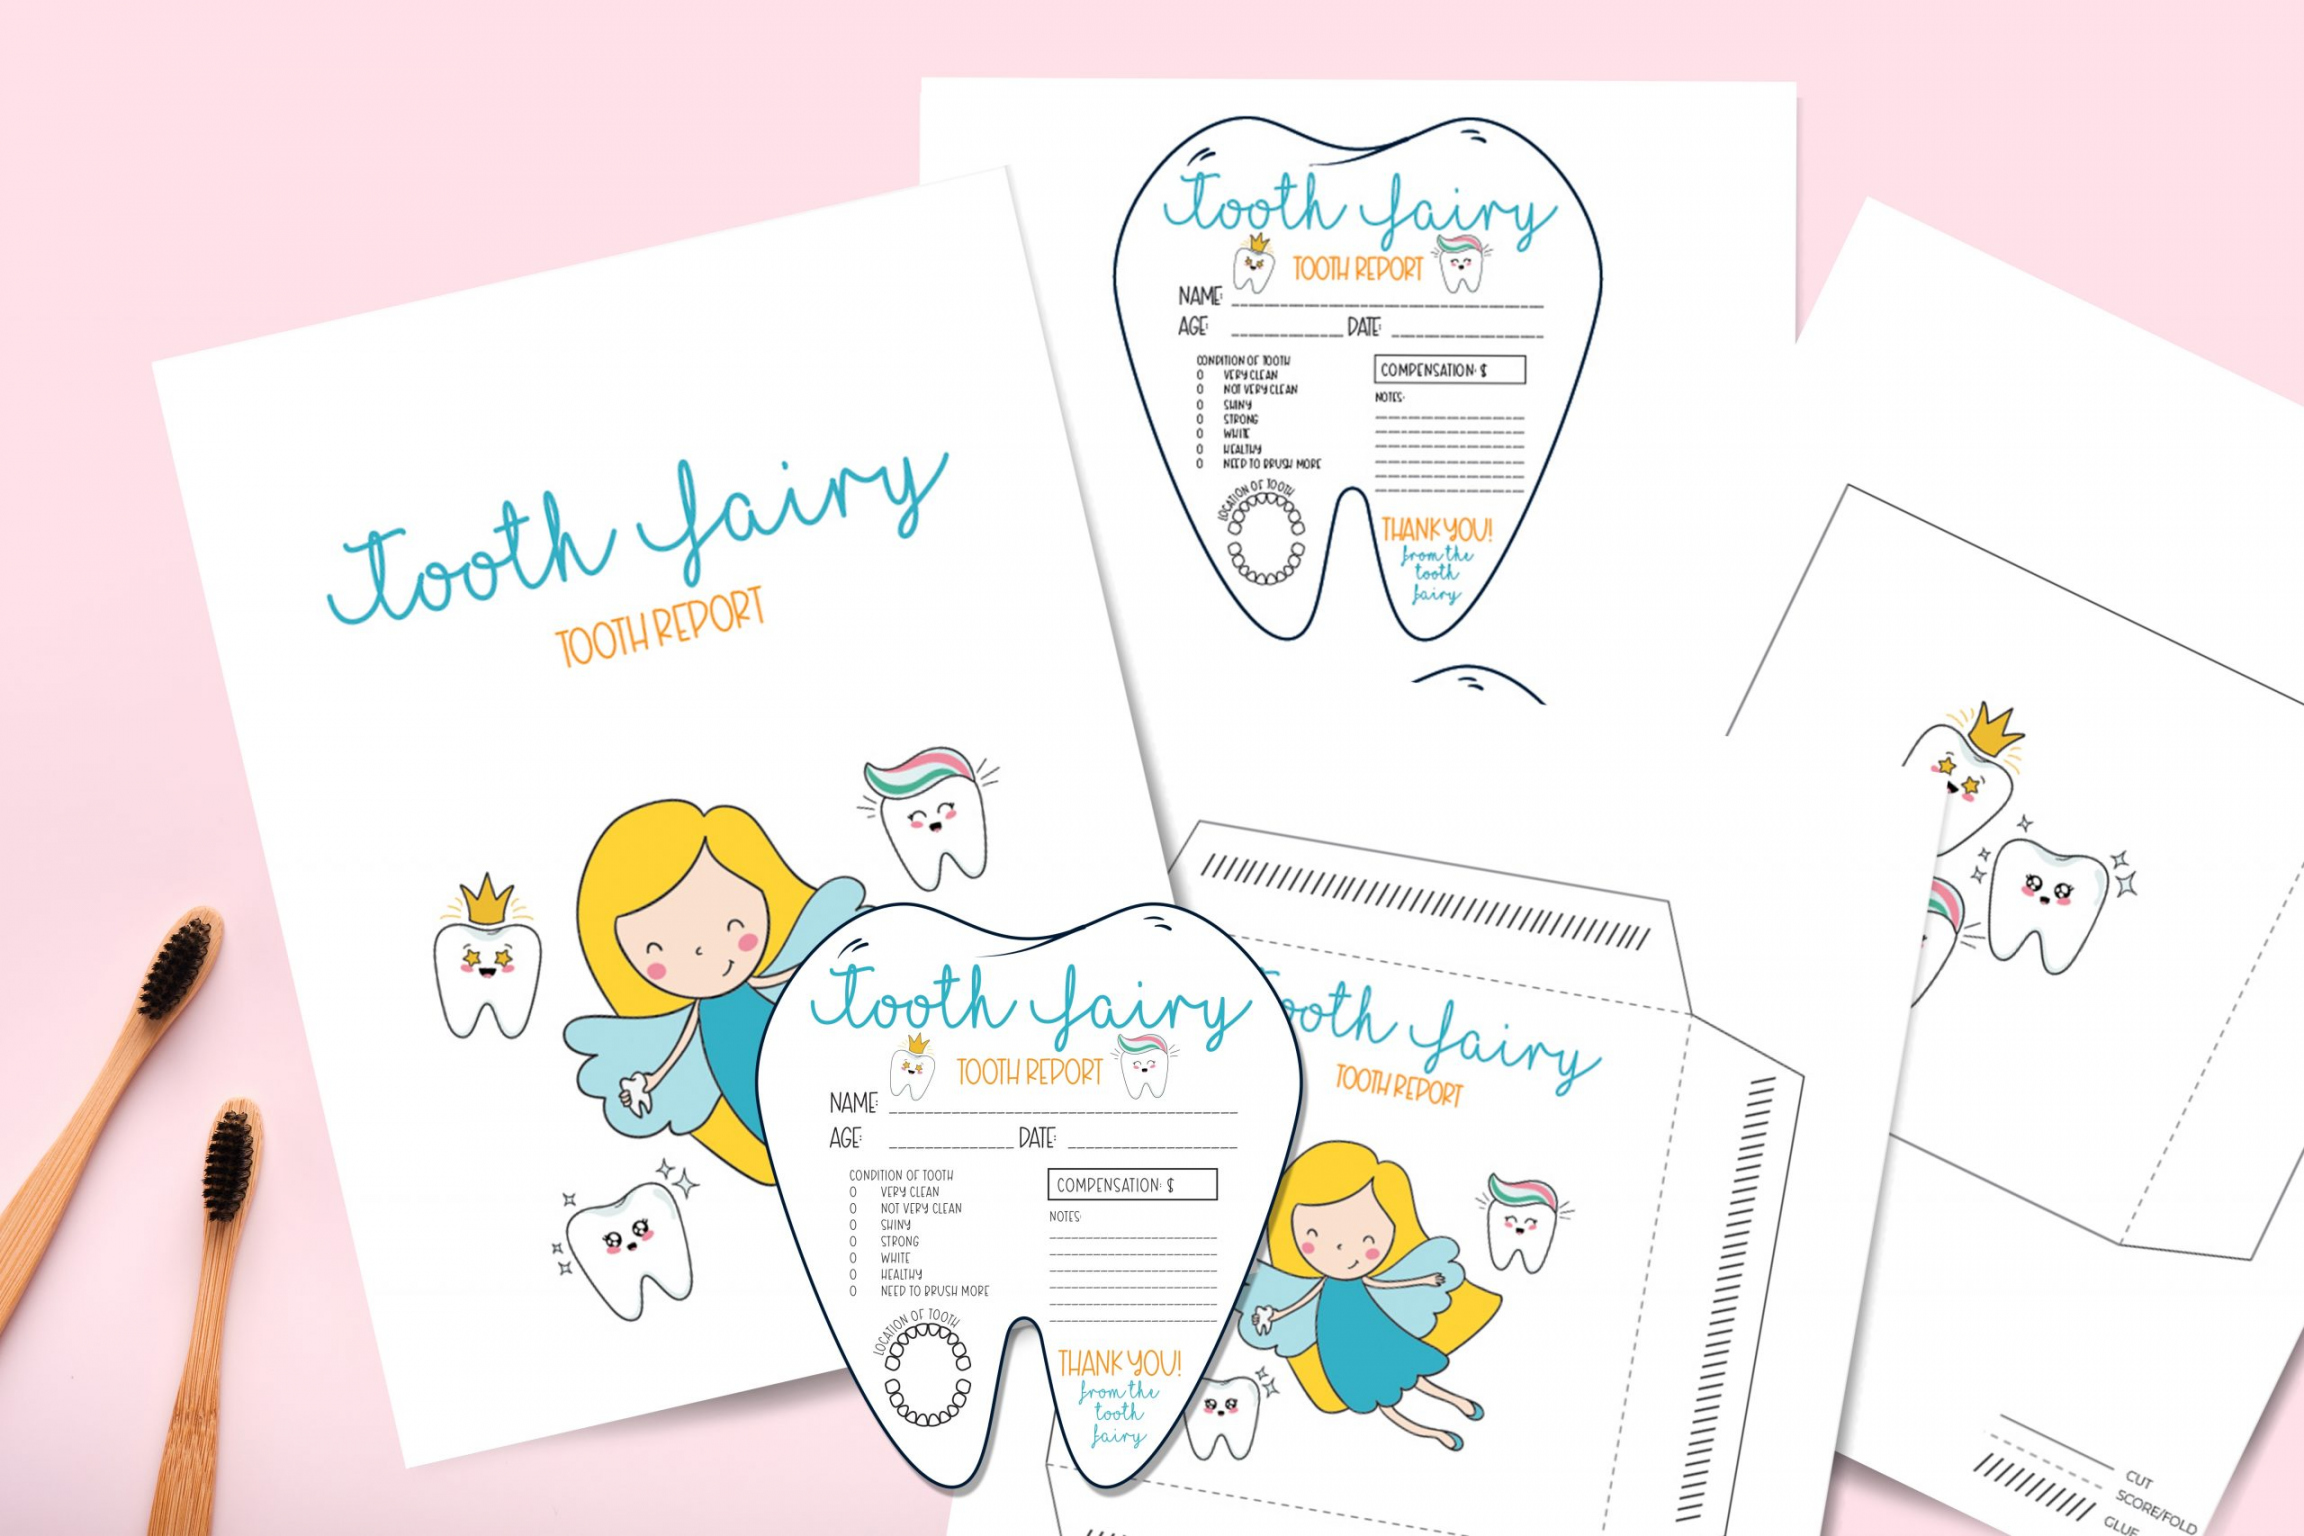 Tooth Fairy Free Printable - Printable - FREE Tooth Fairy Printable Note & Receipt For Extra Magic